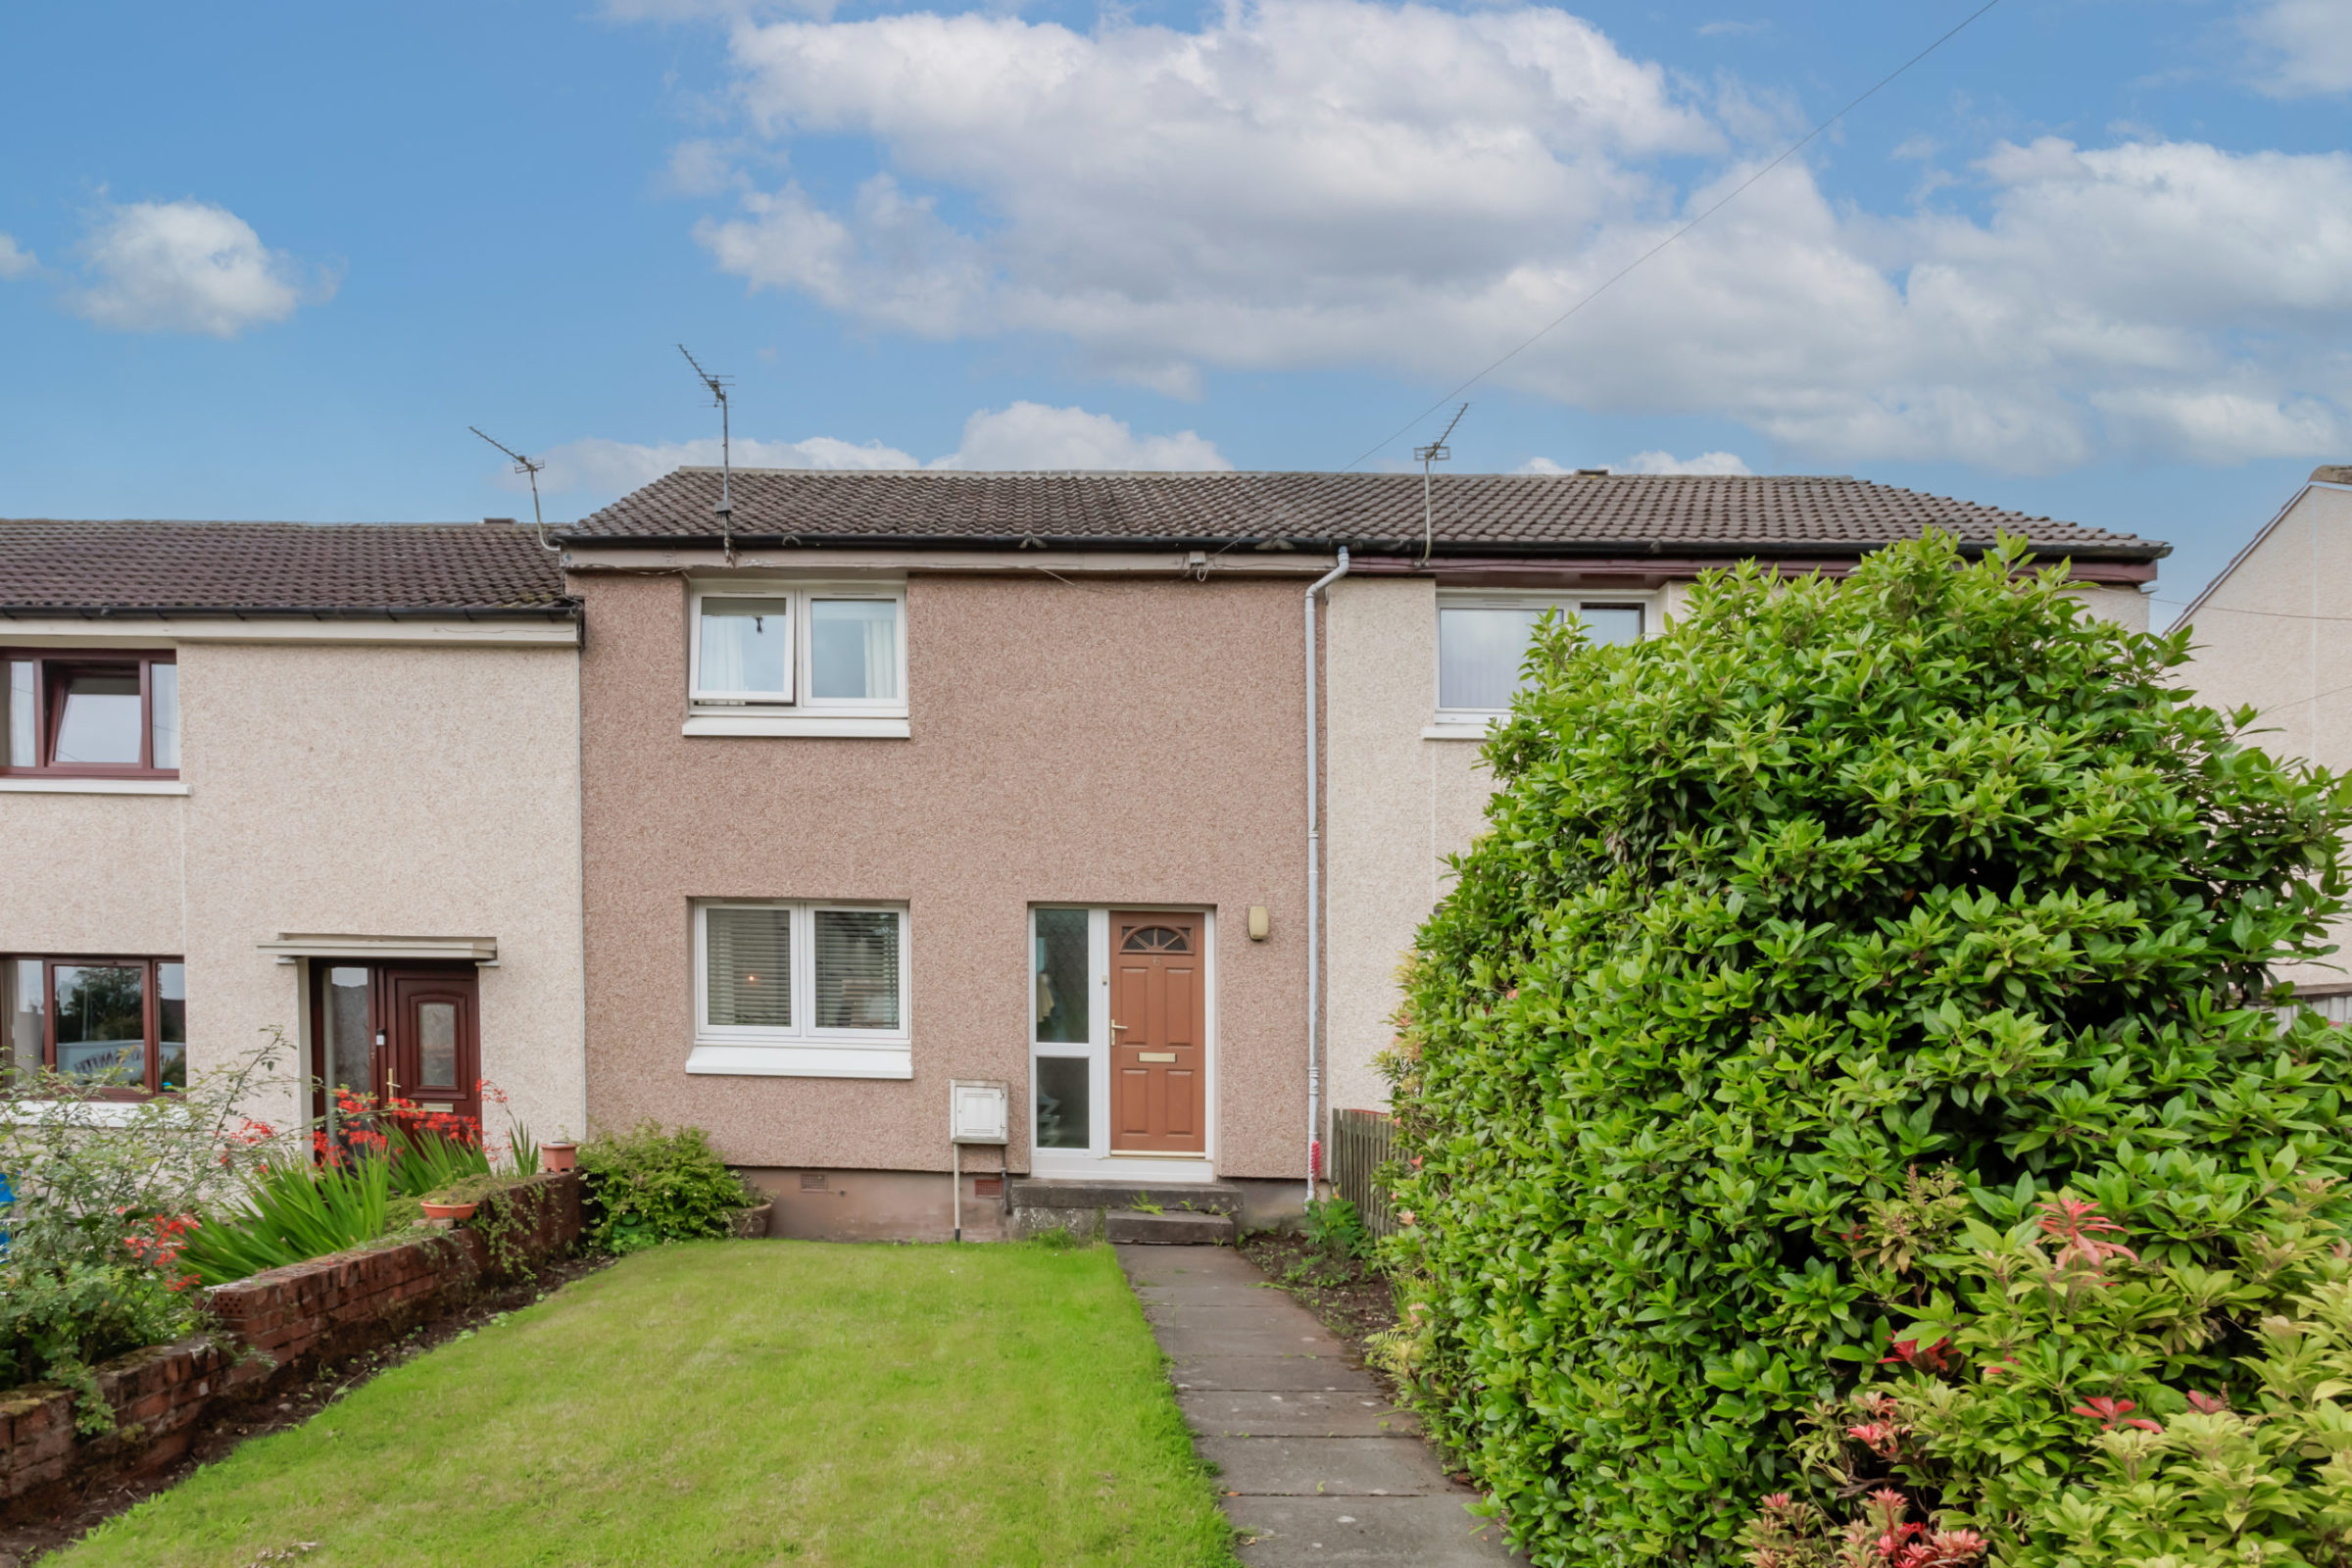 2 Bed Mid Terraced Villa – 6 Duchally Place, Auchterarder, PH3 1AY